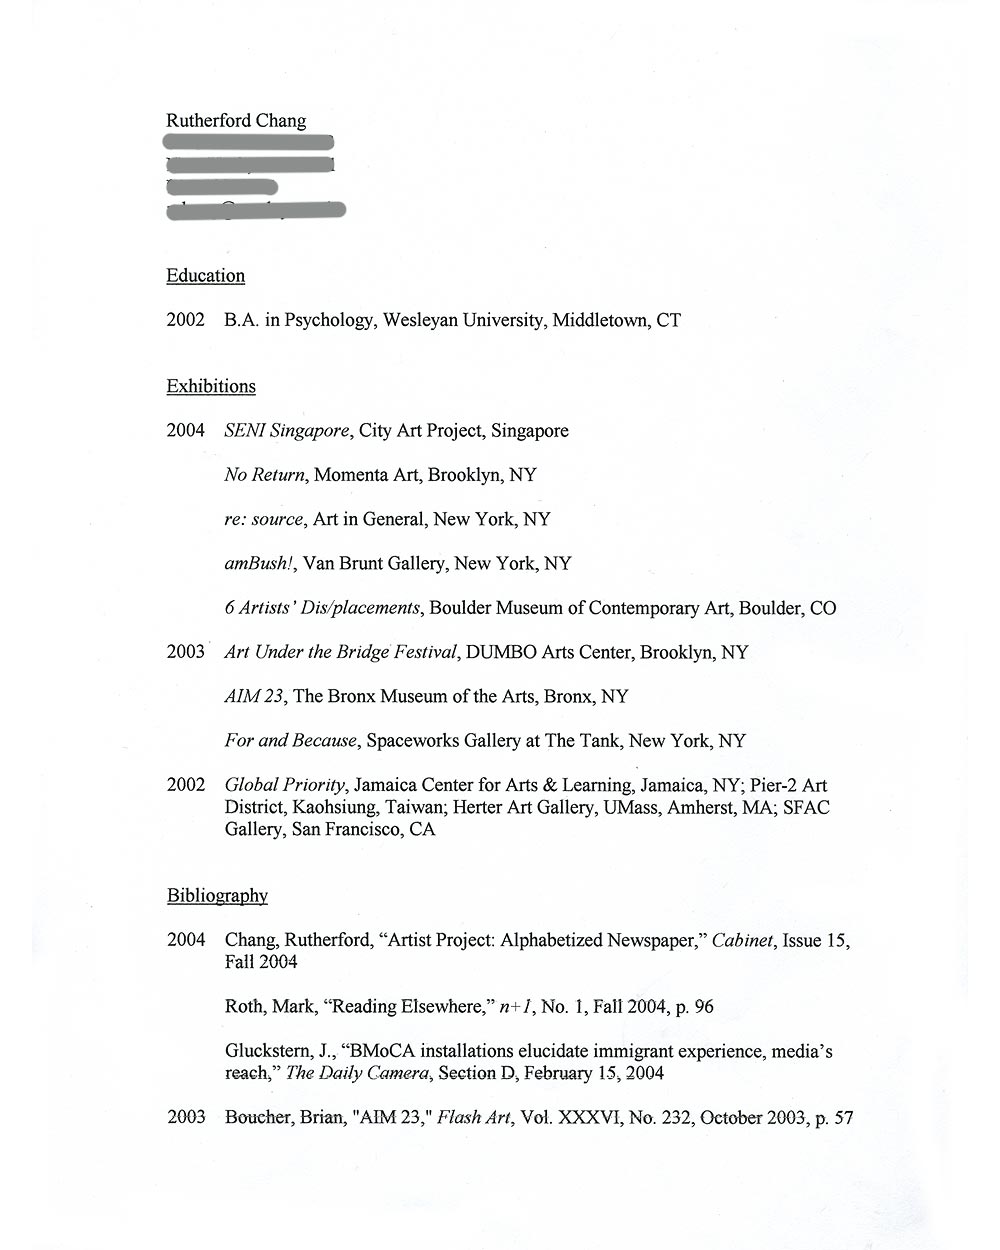 Rutherford Chang's resume, pg 1